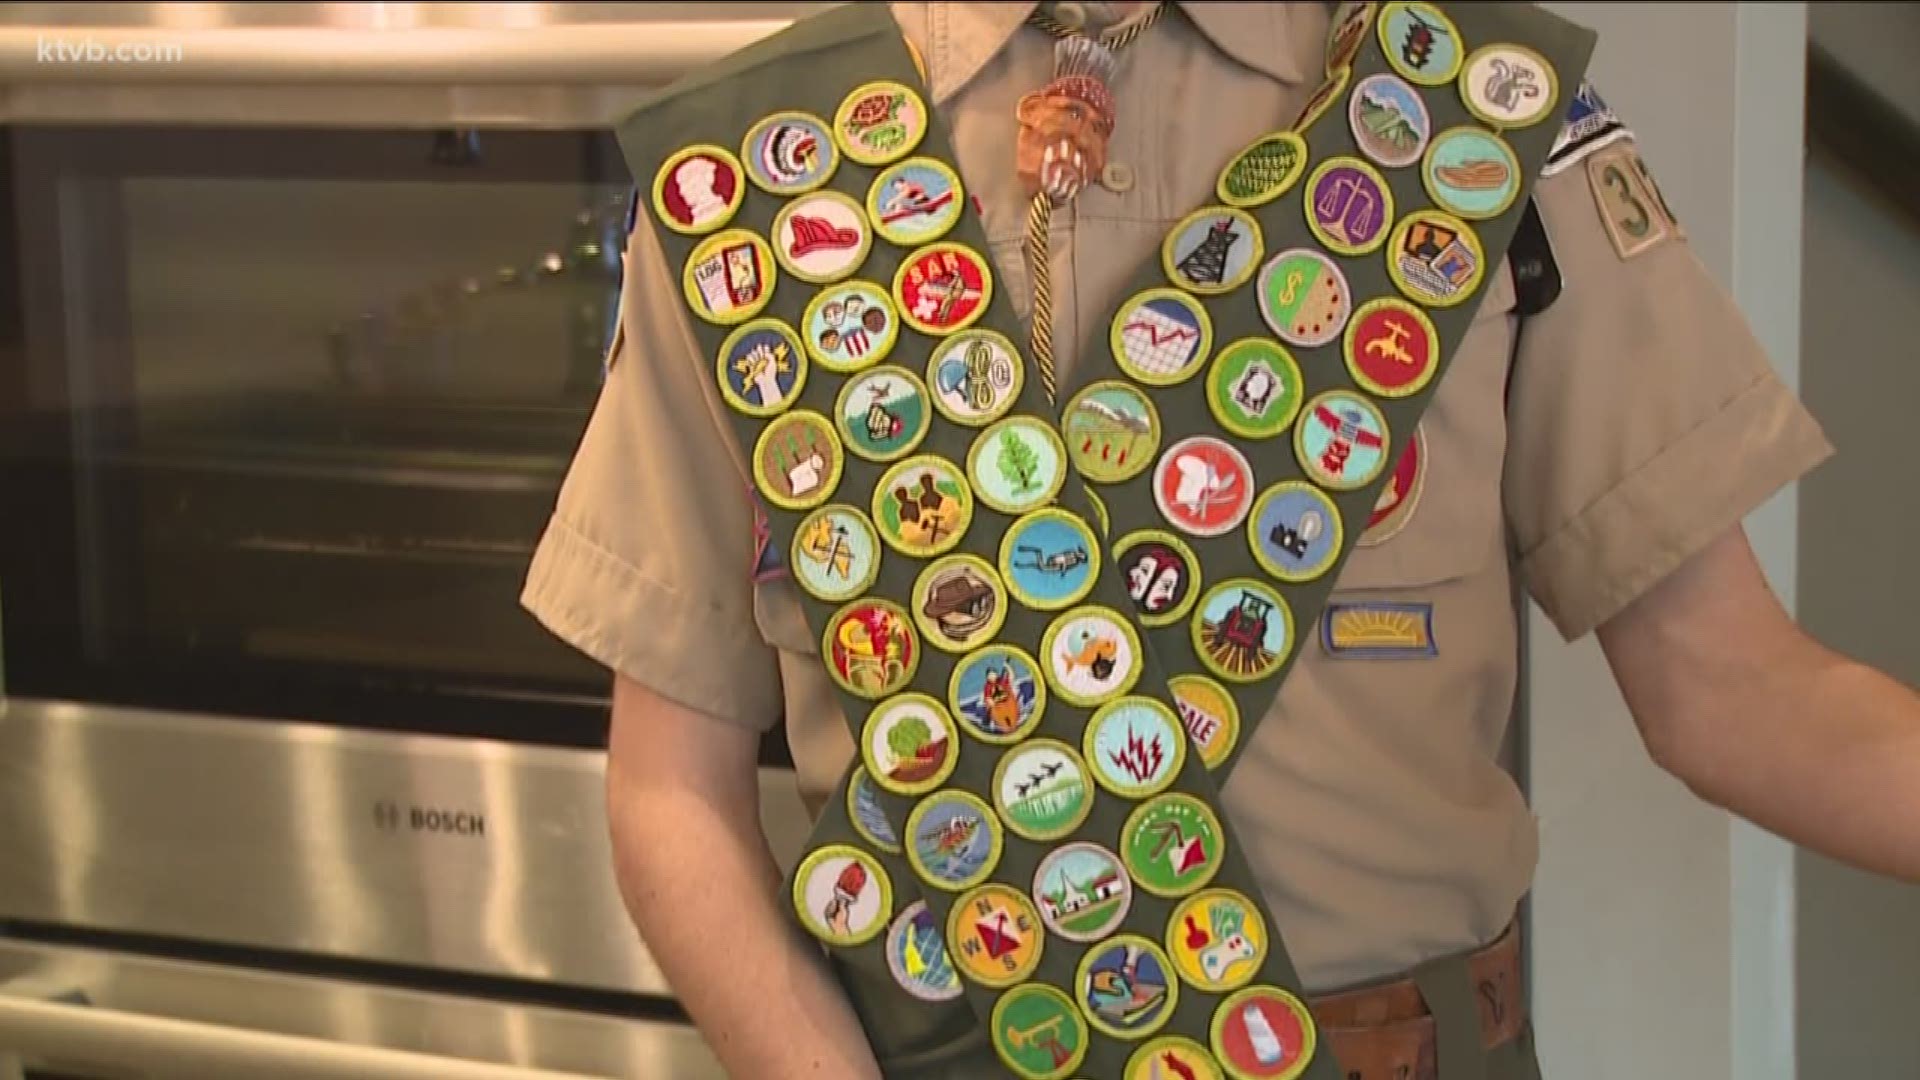 The twins earned 137 merit badges over the last four years, but they're not done with that honor.